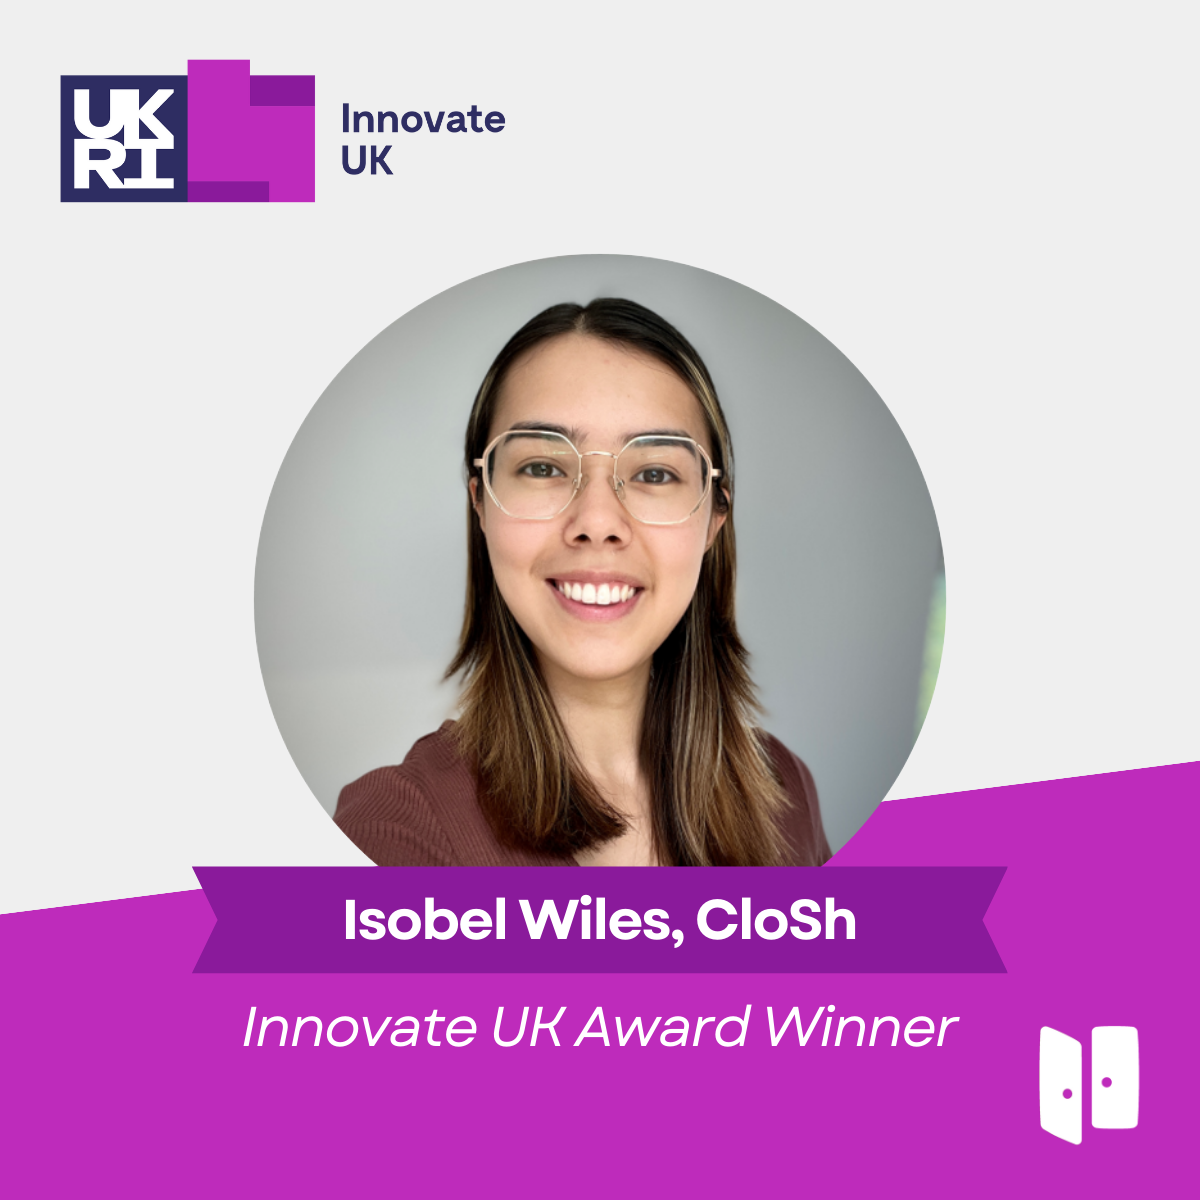 Purple promotion image of Isobel Wiles, with text below saying she is an Innovate UK winner